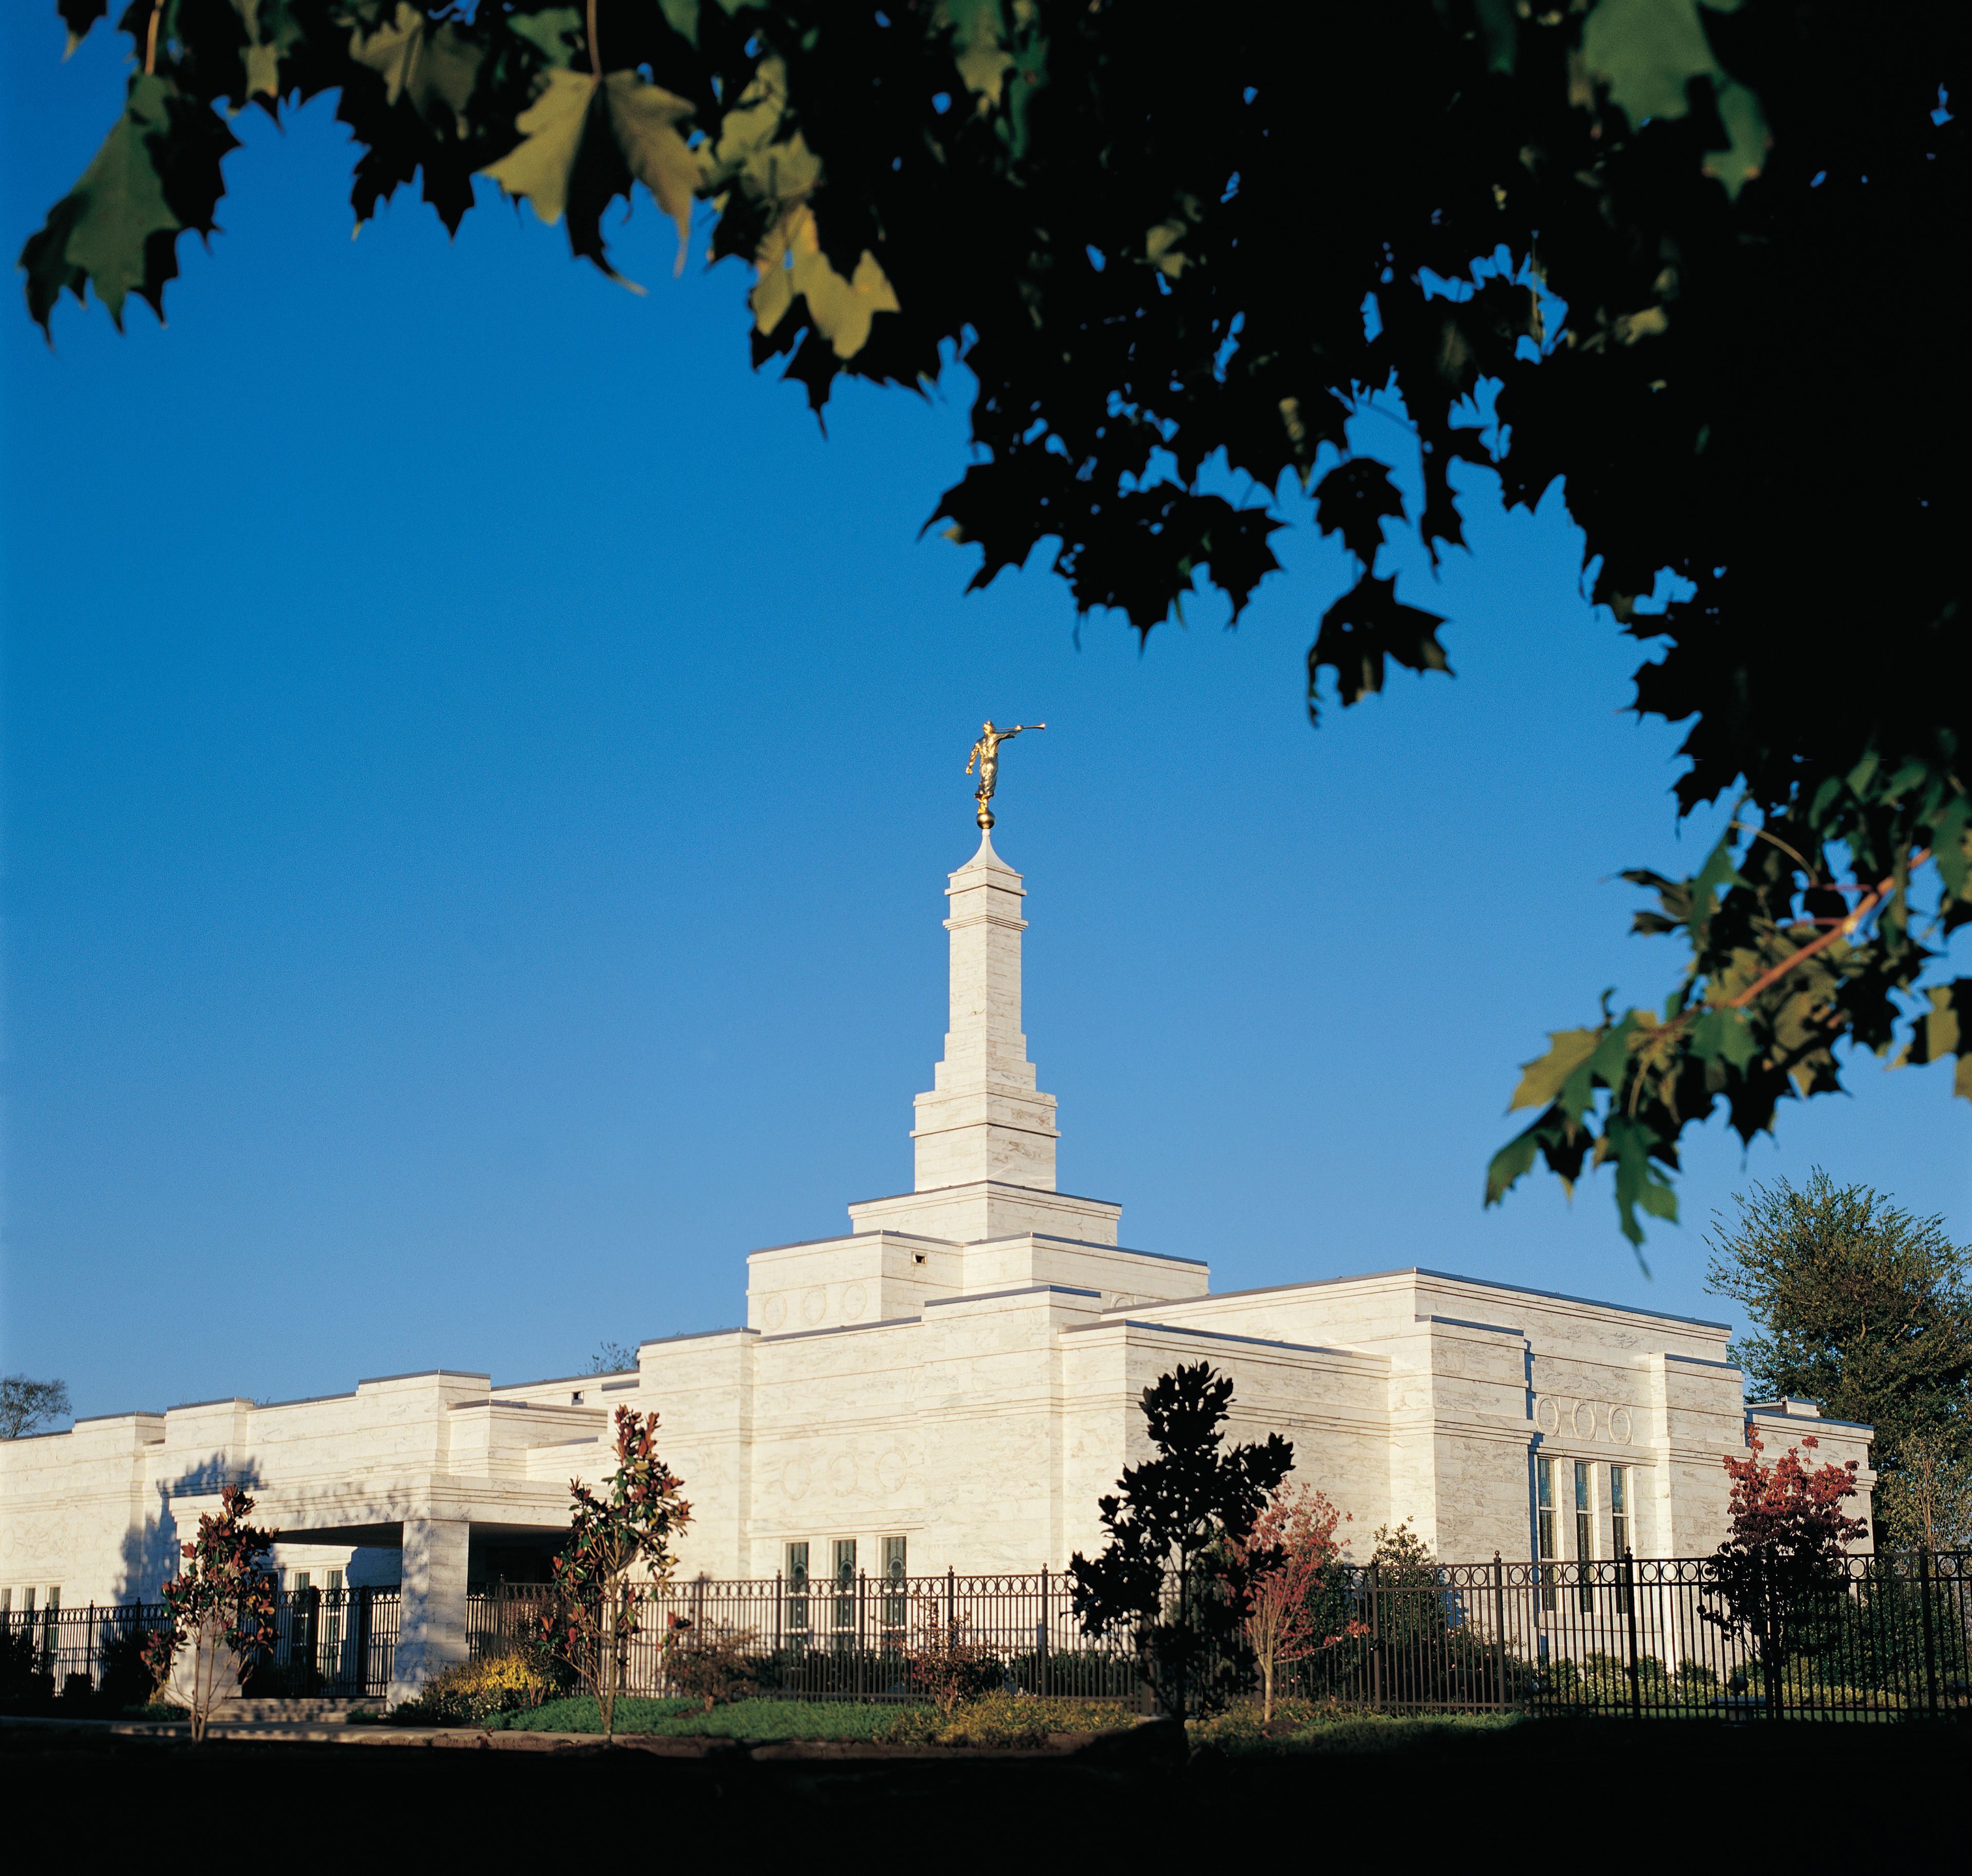 The Nashville Tennessee Temple on a clear day.